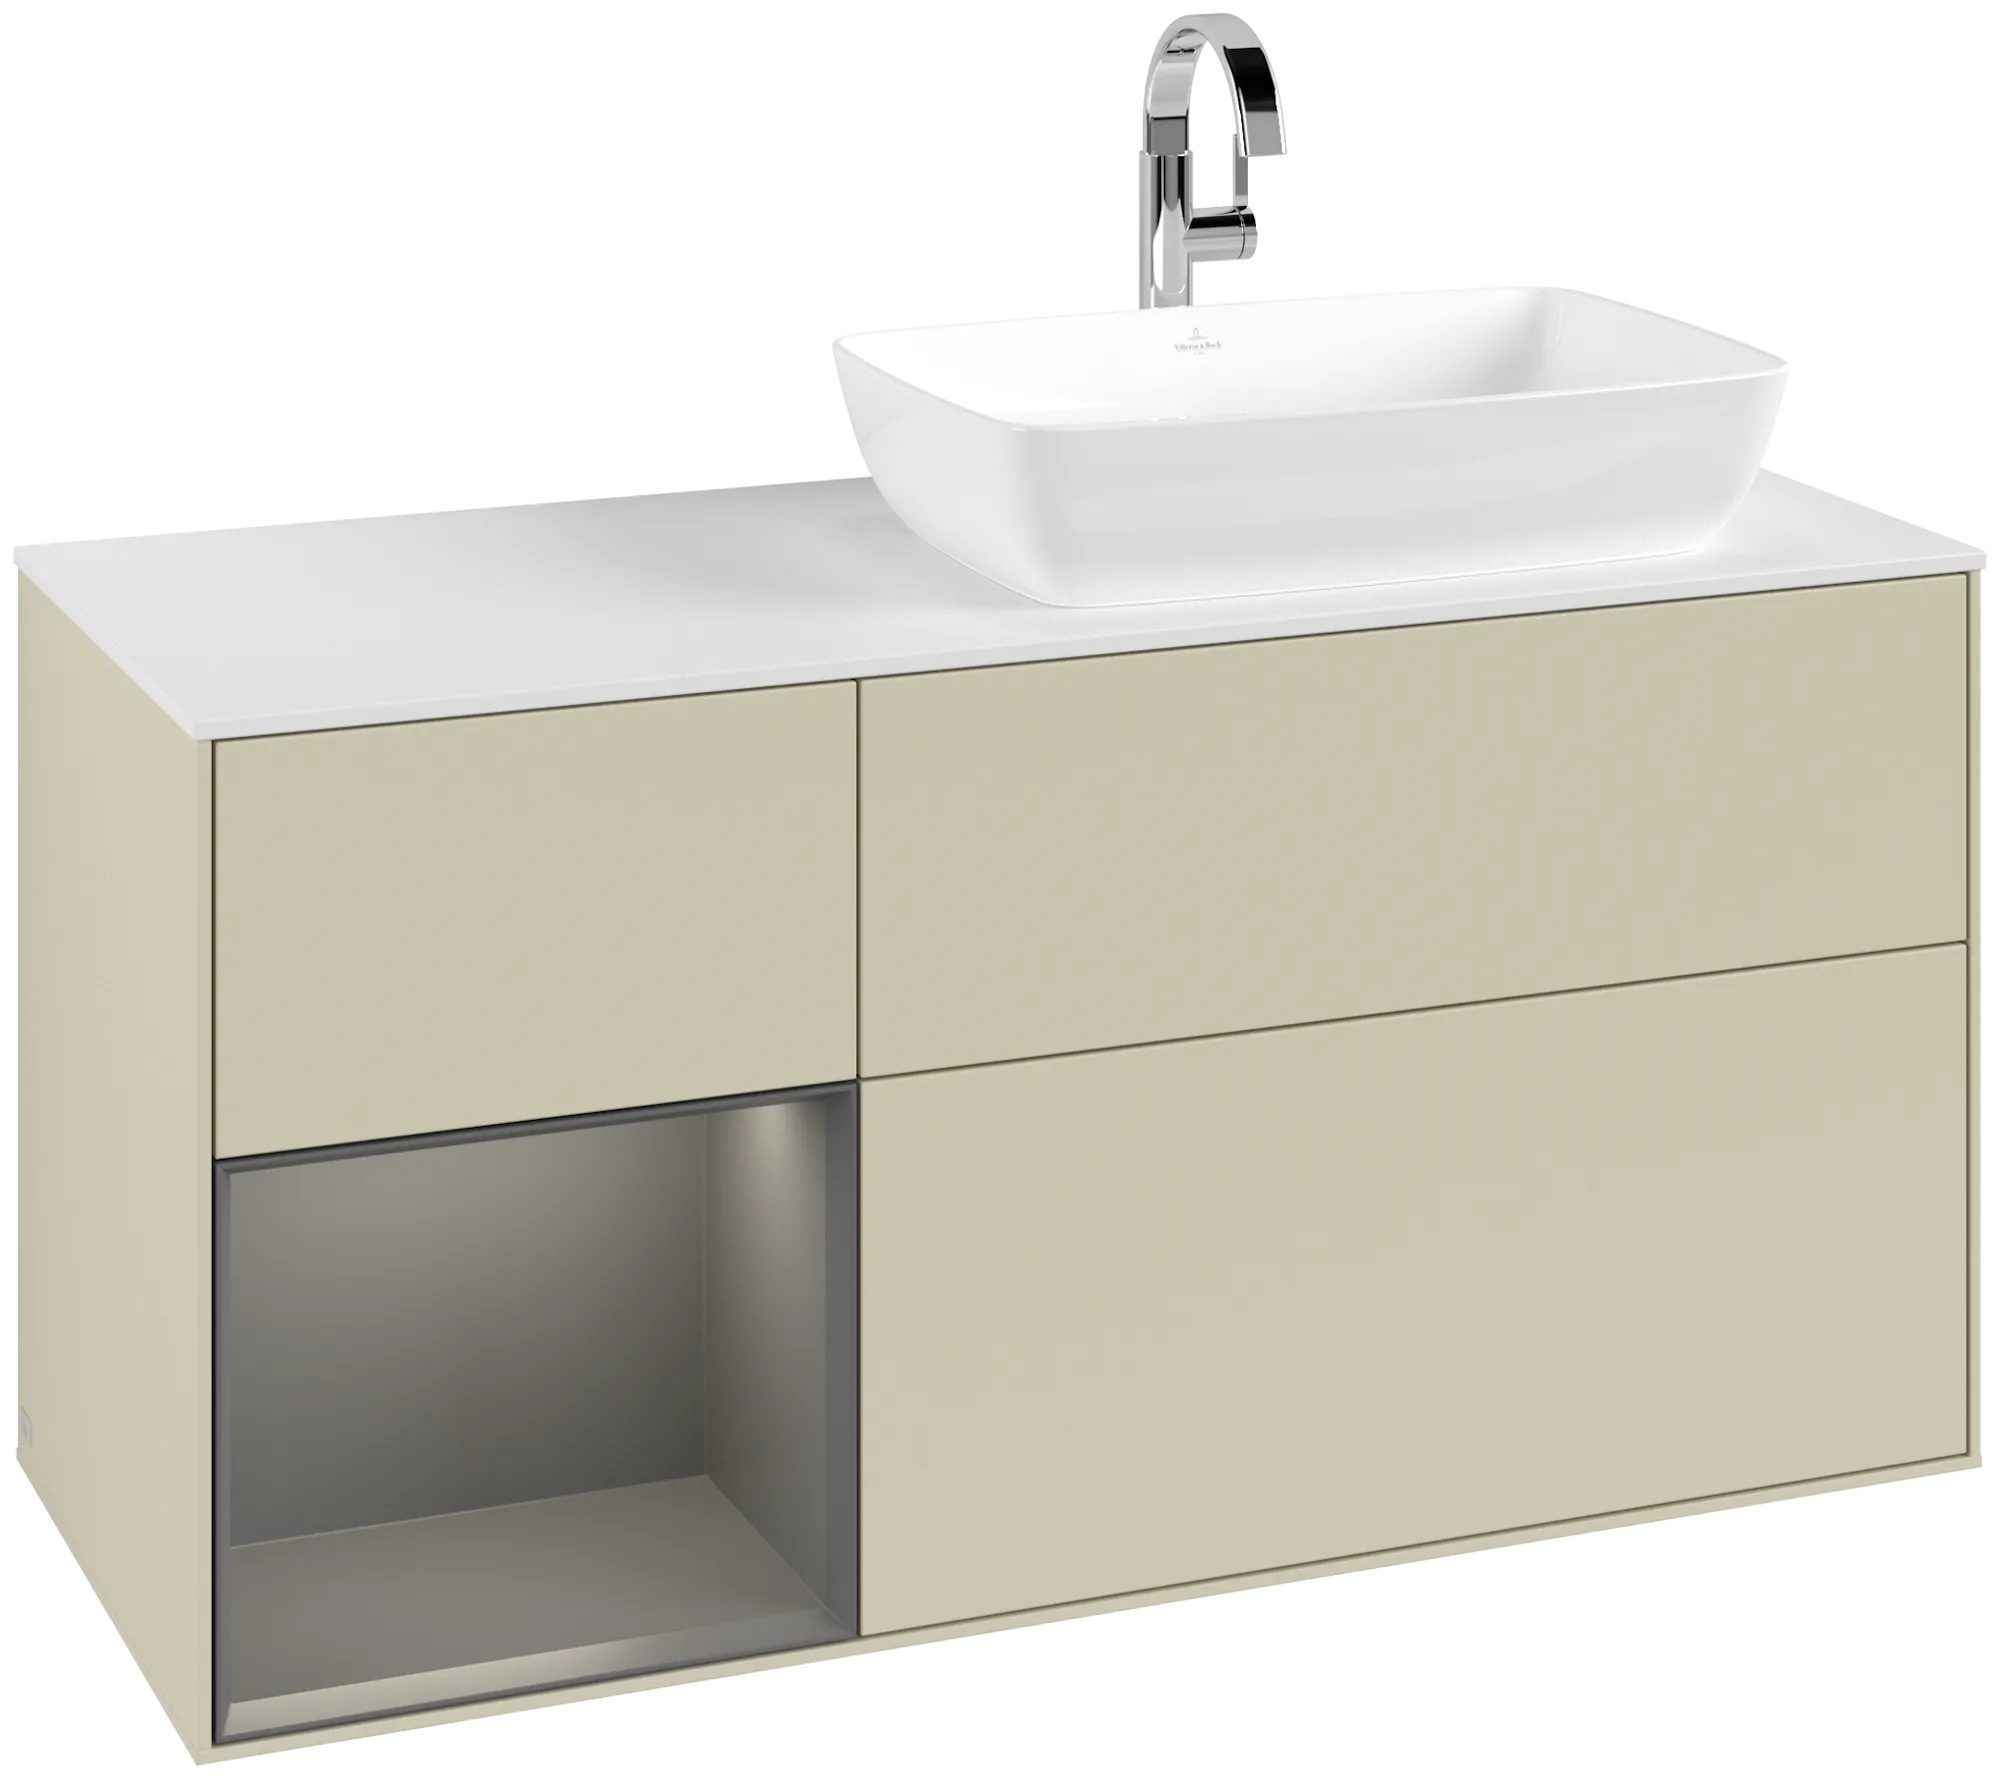 Obrázek VILLEROY BOCH Finion Vanity unit, with lighting, 3 pull-out compartments, 1200 x 603 x 501 mm, Silk Grey Matt Lacquer / Anthracite Matt Lacquer / Glass White Matt #G801GKHJ